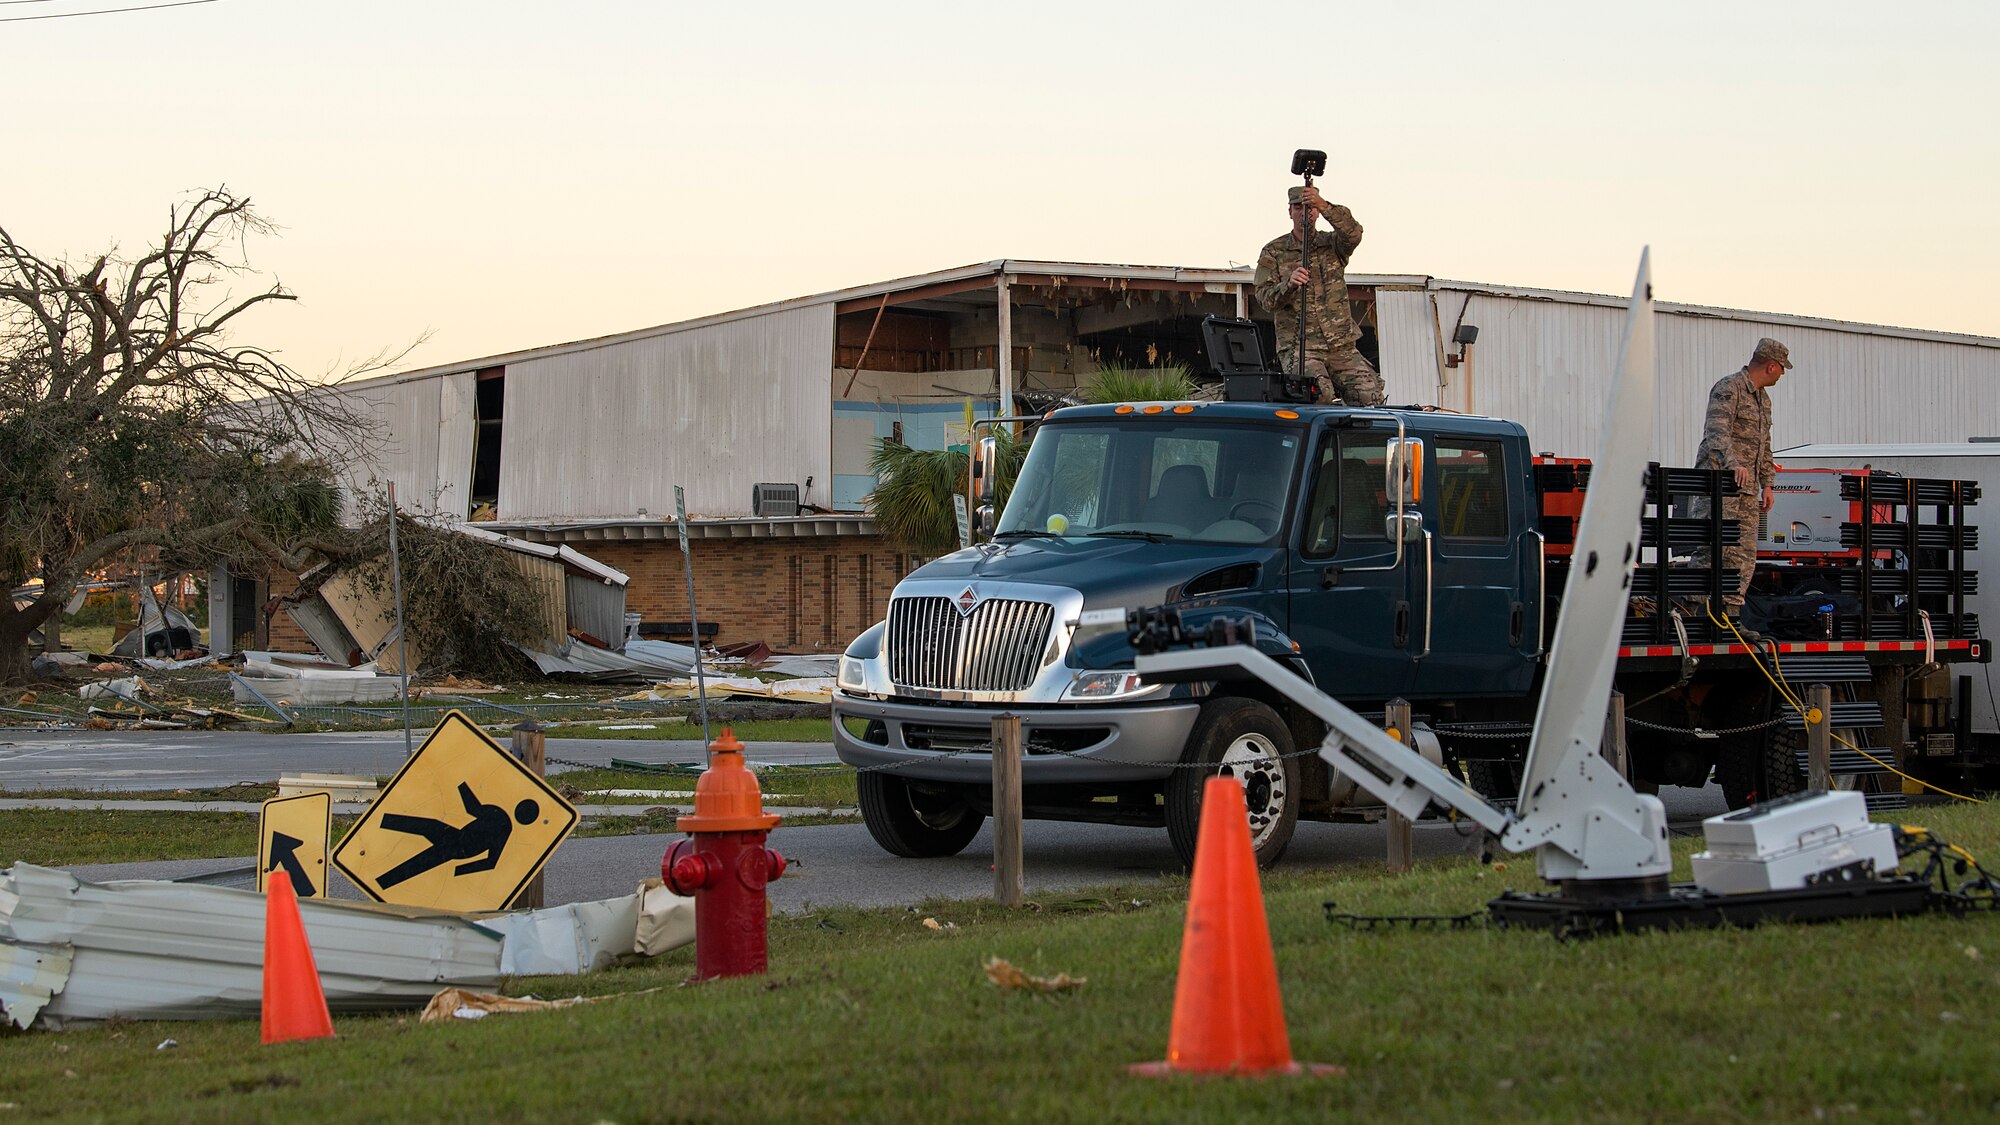 U.S. Air Force Tech Sgt. Ryan Boorman, 290th Joint Communication Support Squadron radio frequency transmissions specialist, works to restore communication capabilities outside the Bay County Government Center in Panama City, Fla., Oct. 13, 2018. The Florida Air National Guard squadron and Joint Communication Service Element, U.S. Transportation Command, both from MacDill Air Force Base, train and deploy together all over the world to rapidly enable Total Force success across the full spectrum of operations. (U.S. Air Force photo by Airman 1st Class Caleb Nunez)